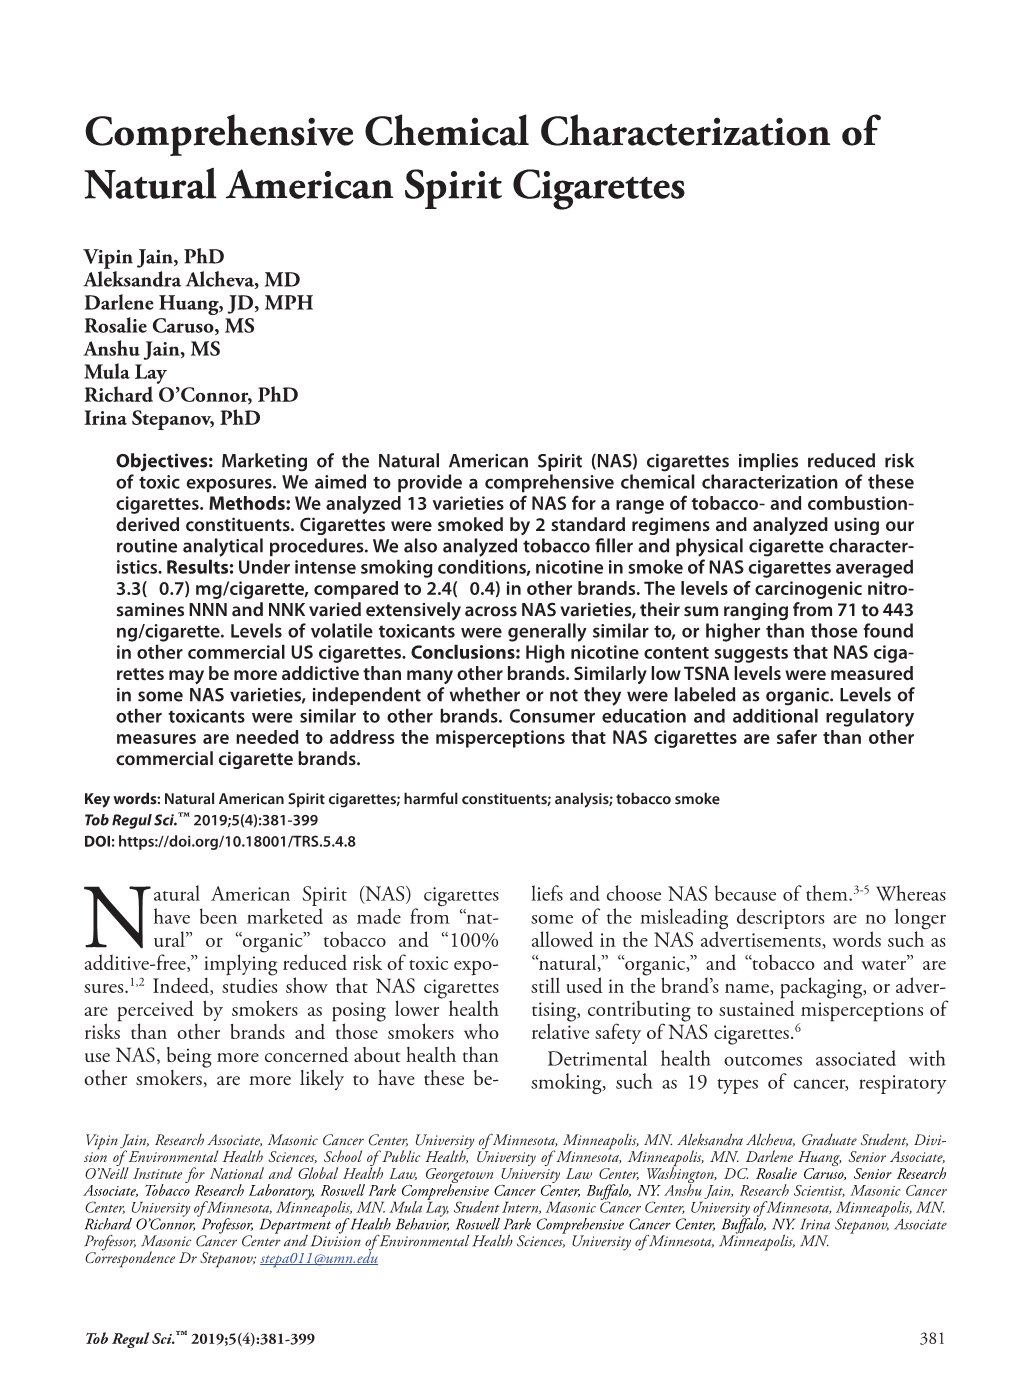 Comprehensive Chemical Characterization of Natural American Spirit Cigarettes